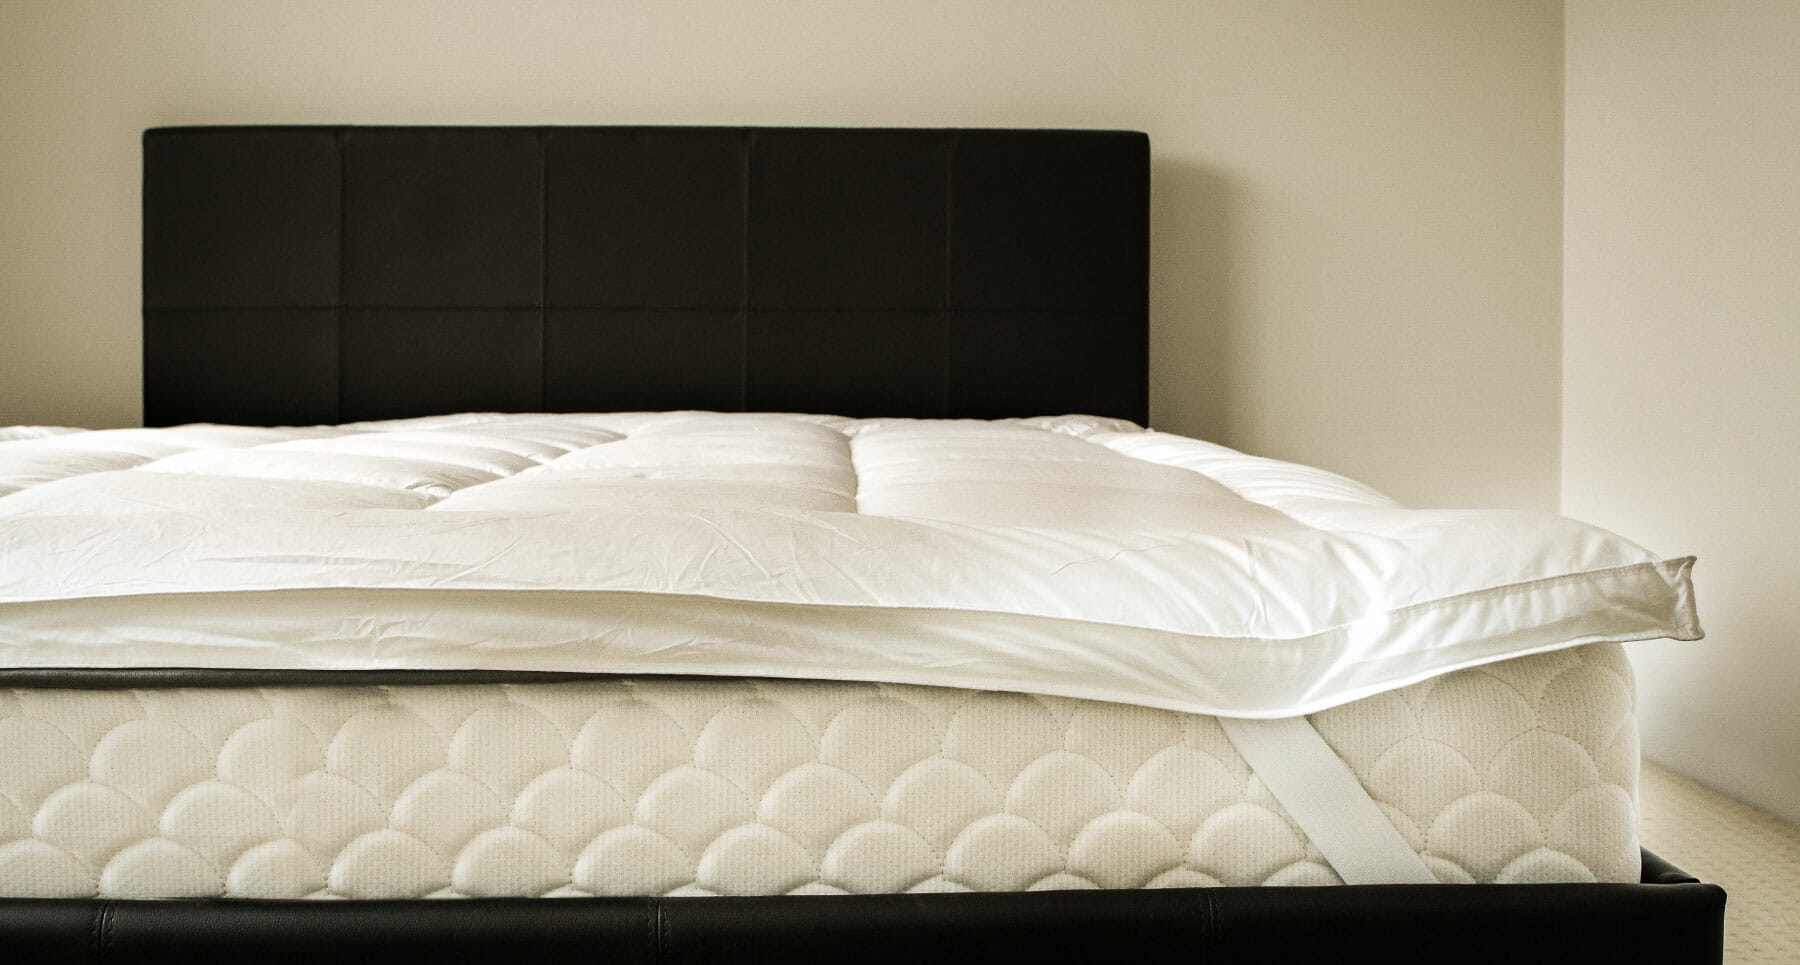 best mattress toppers to prevent pressure sores